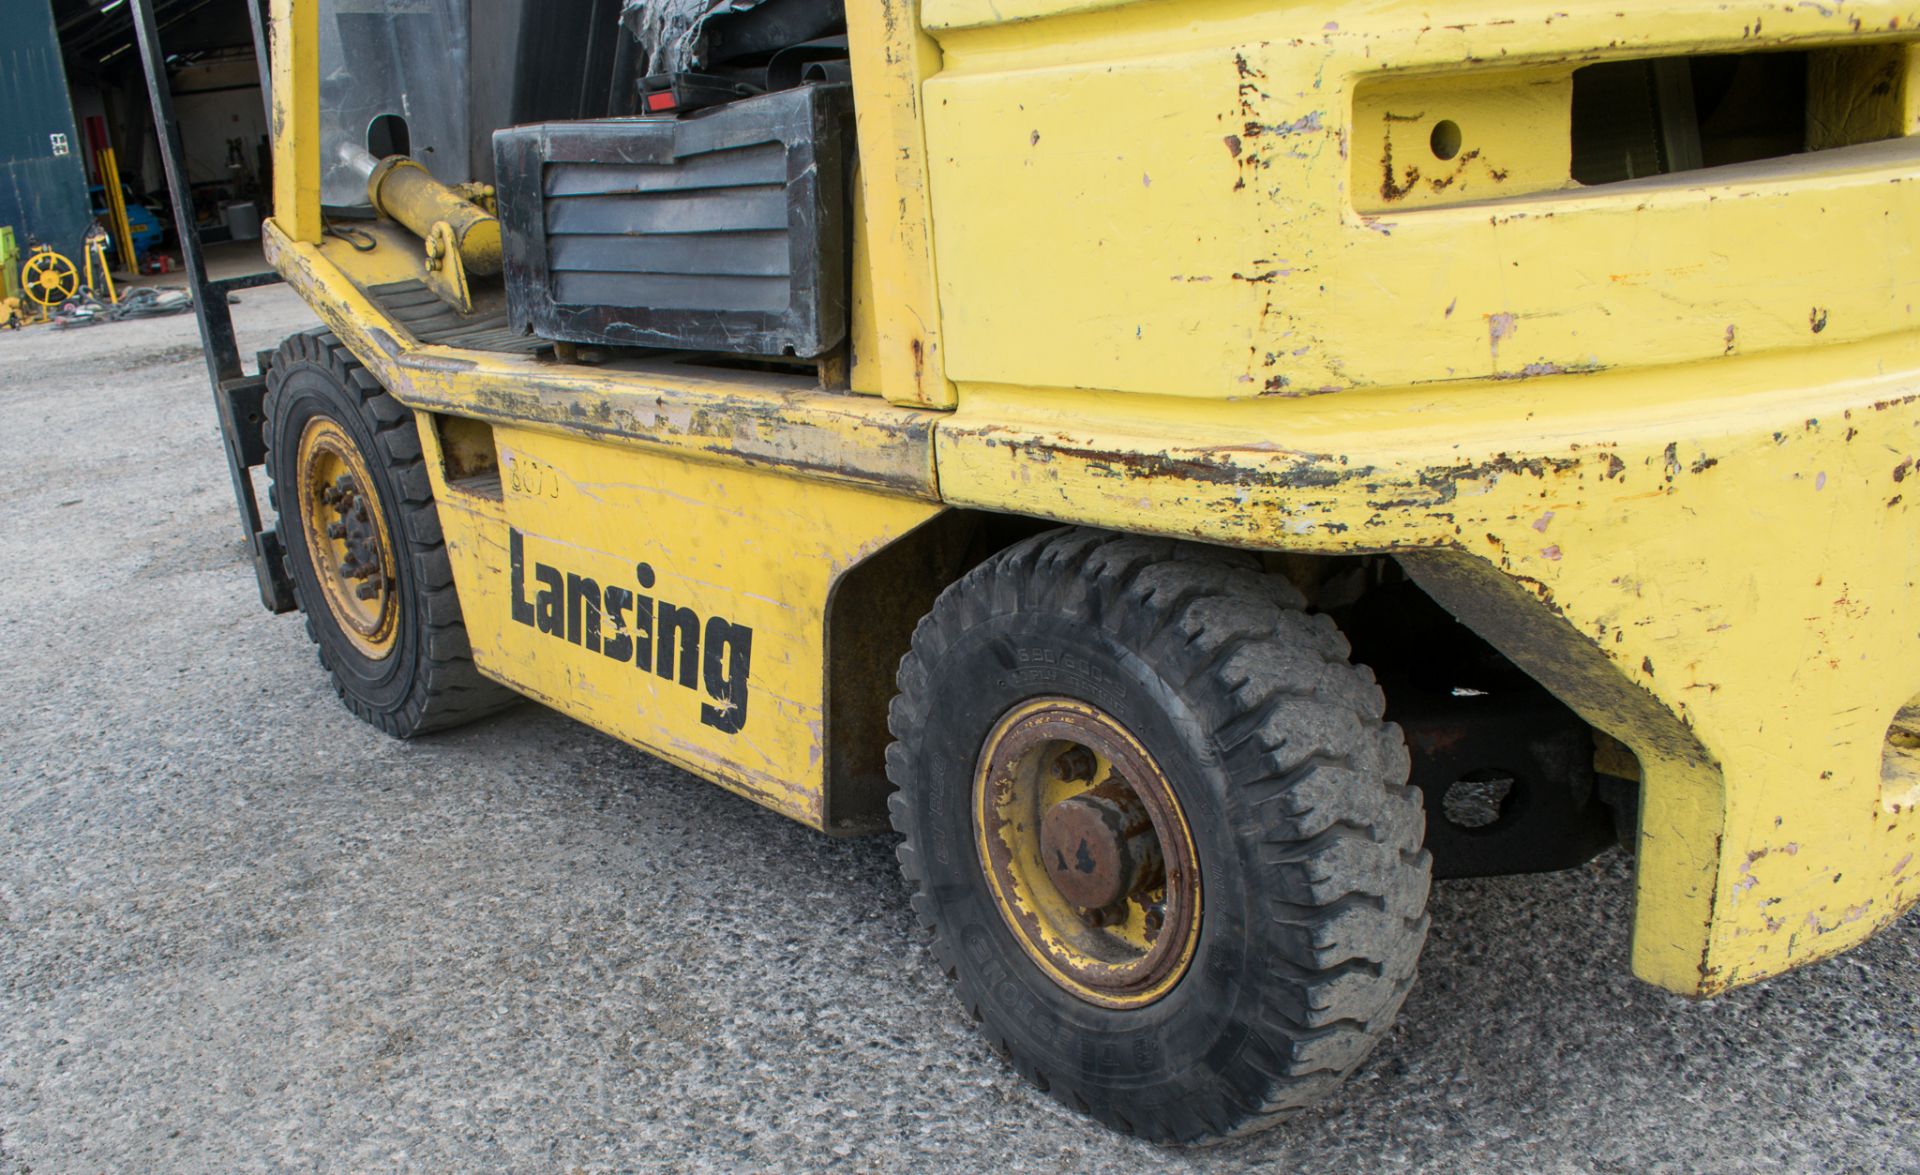 Lansing 7/2.5 2.5 tonne gas powered fork lift truck S/N: 36725 Recorded Hours: 219 - Image 8 of 12